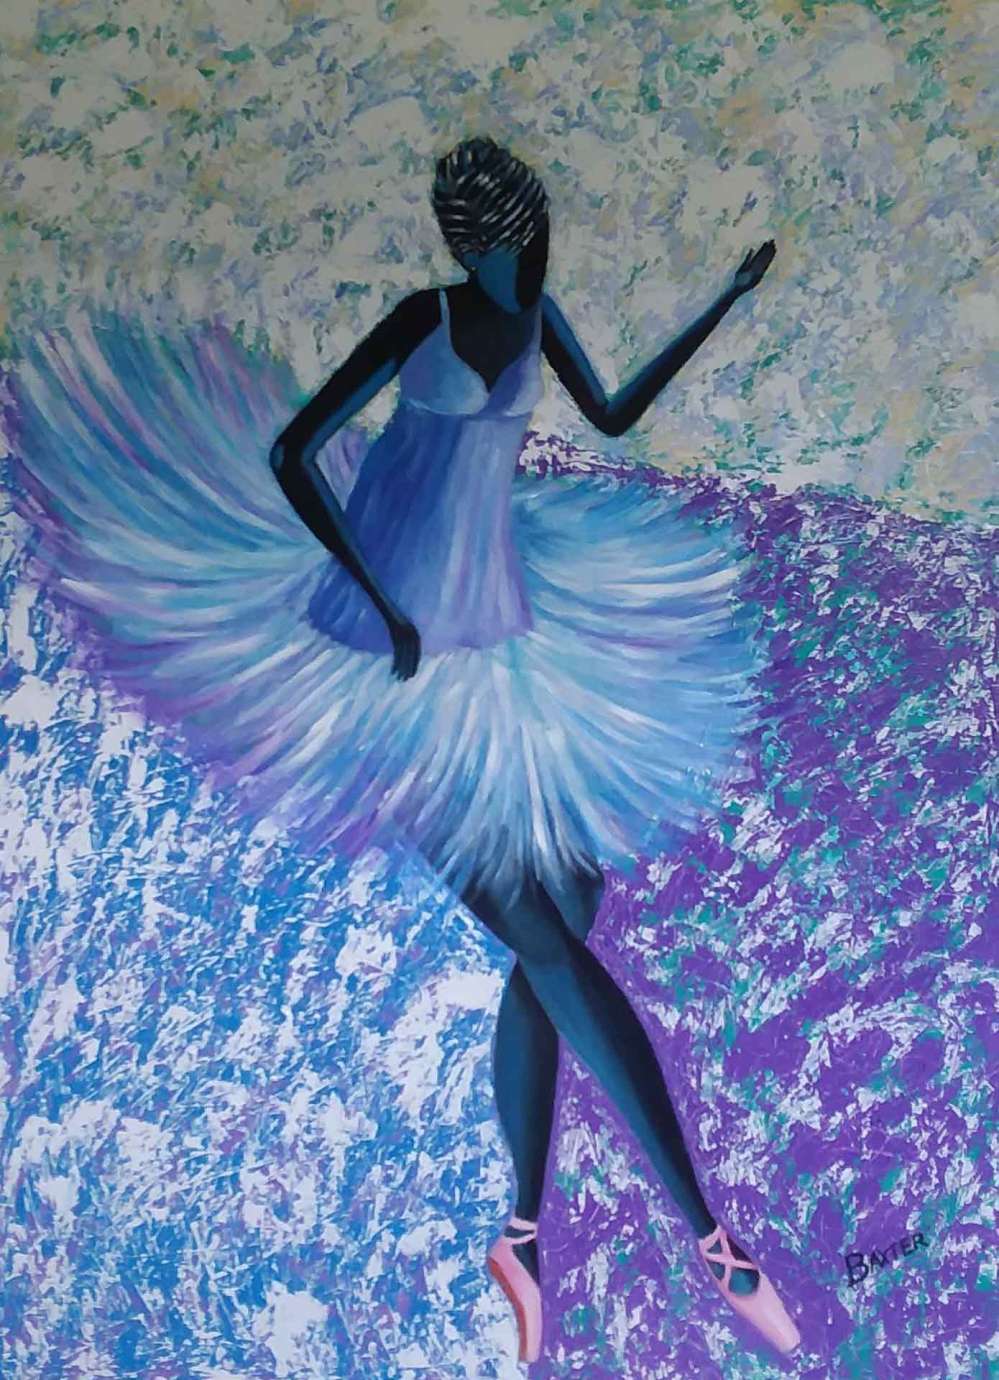 A painting by Edward Baxter of a ballet dancer in blue, purple, black and green